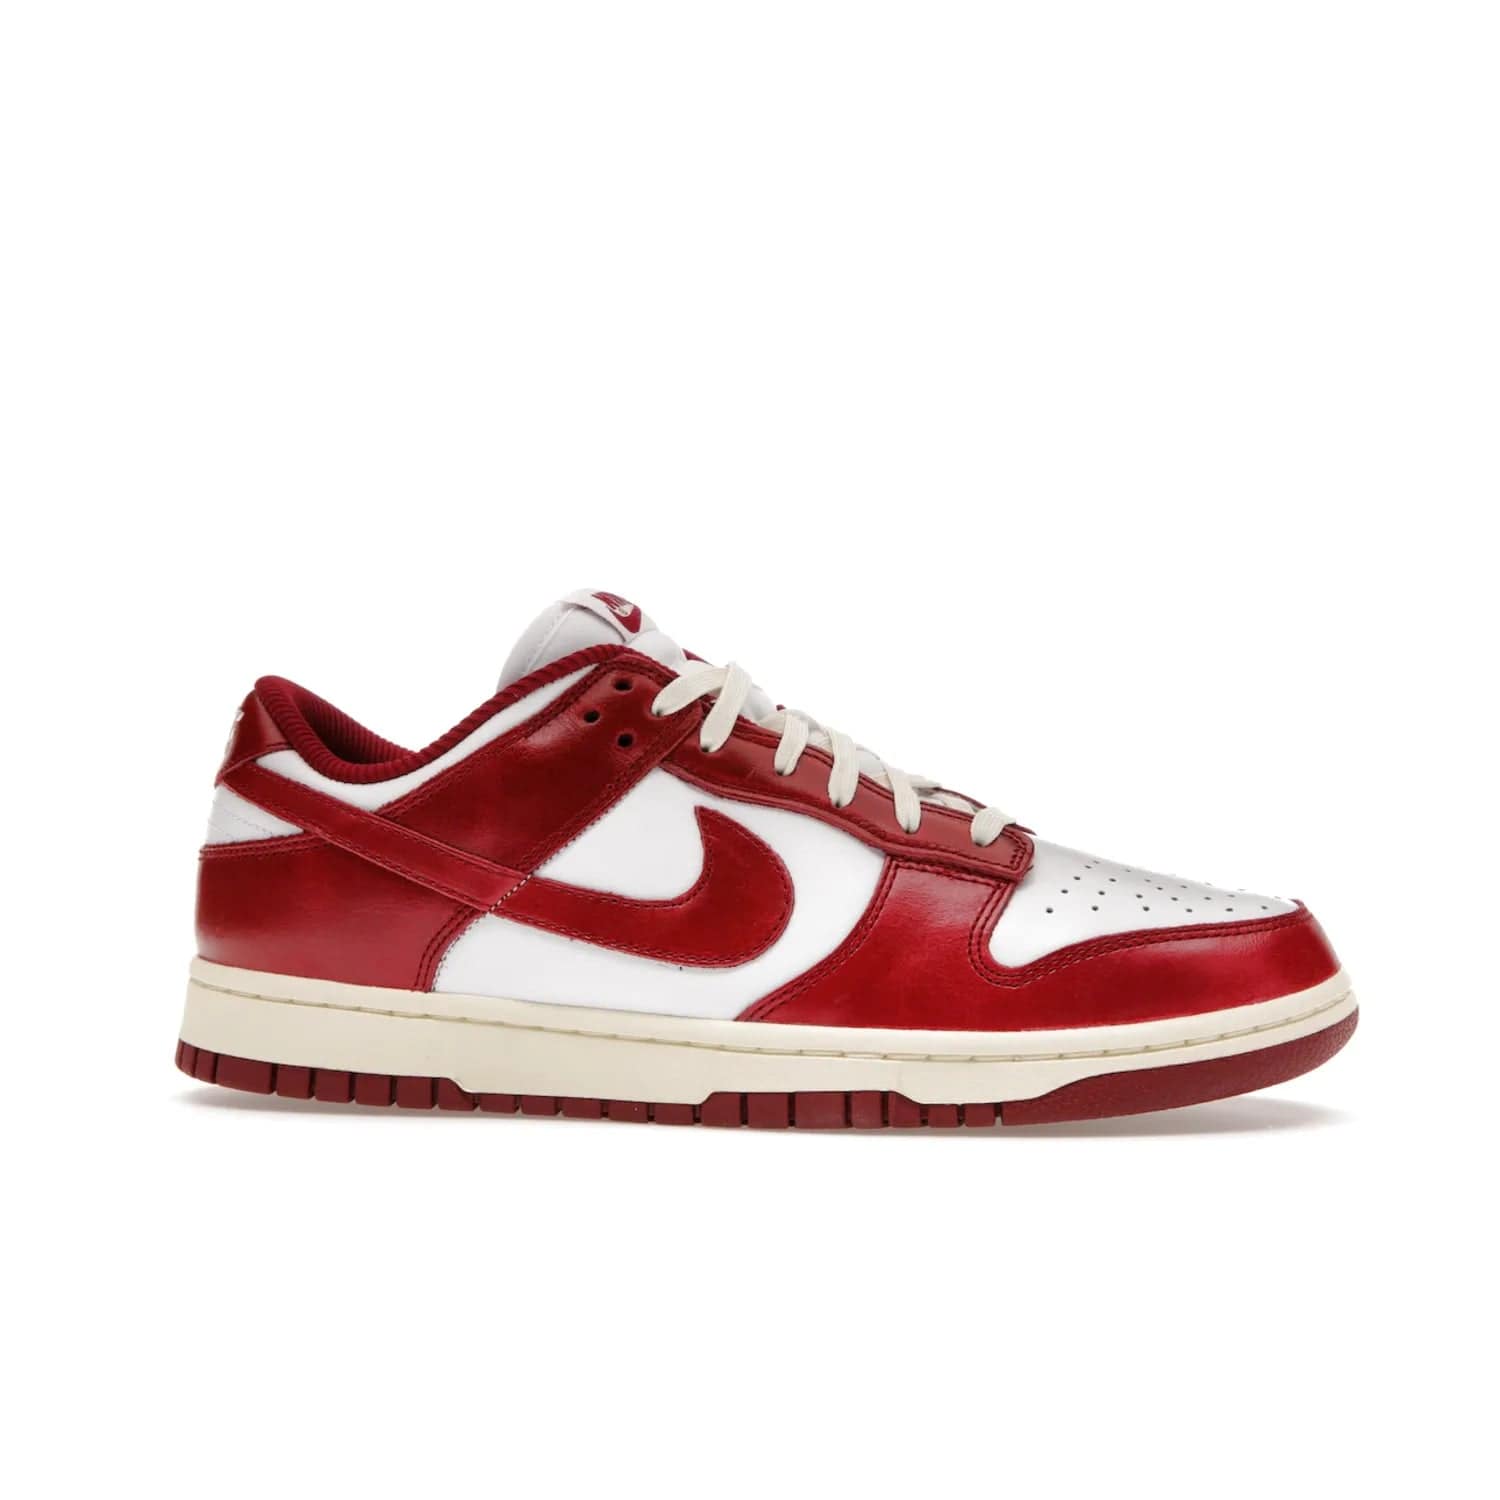 Nike Dunk Low PRM Vintage Team Red (Women's) - Image 2 - Only at www.BallersClubKickz.com - Shop the stylish Nike Dunk Low PRM Vintage Team Red. Signature Red and White leather with Coconut Milk midsoles for an aged finish. 21 April 2023 release.